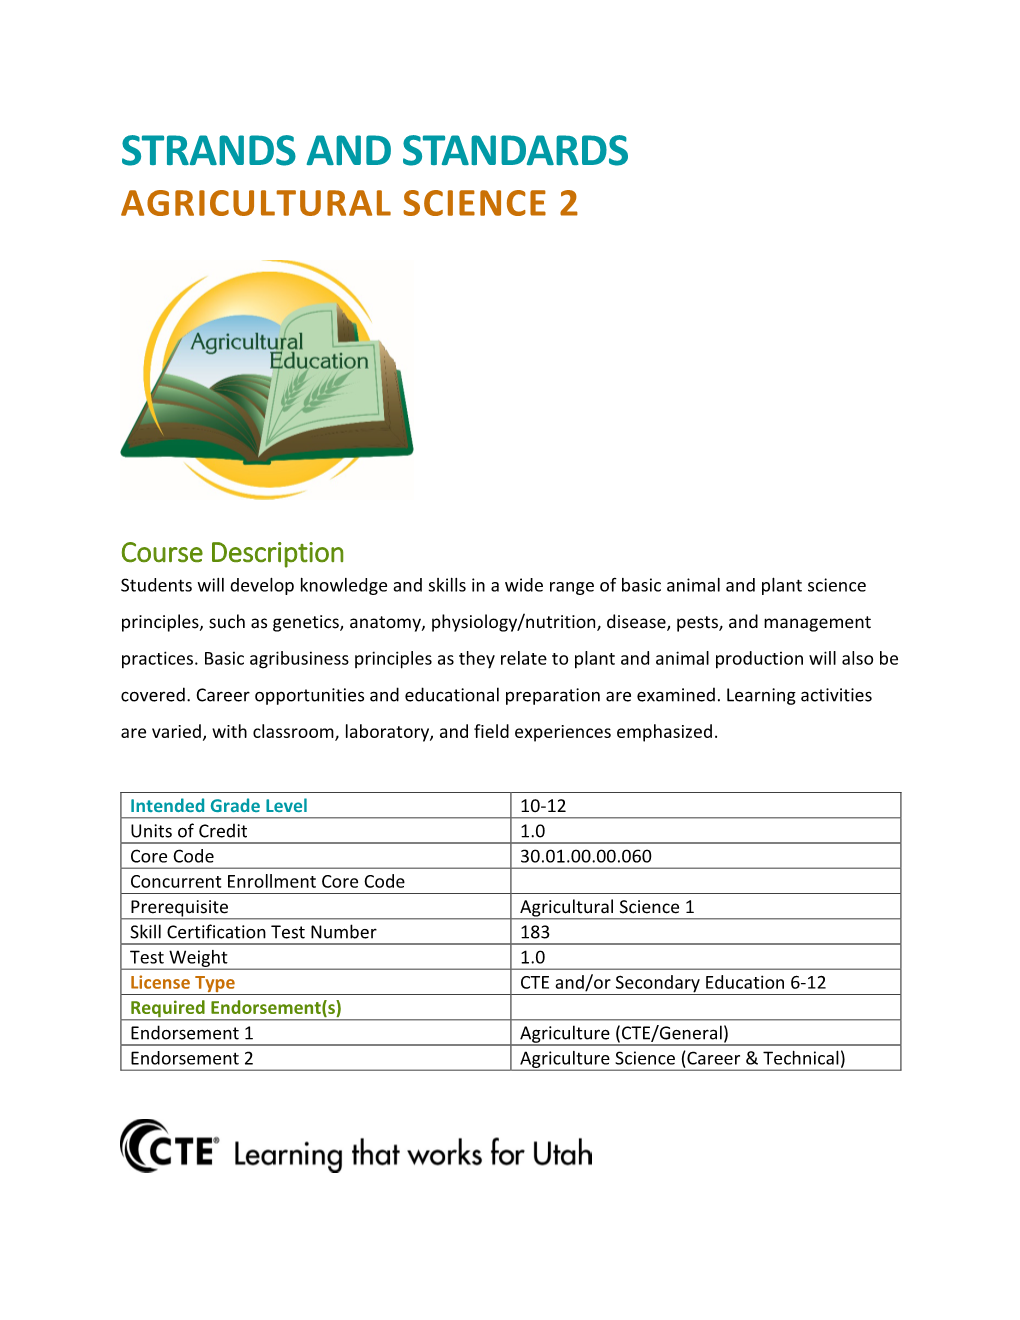 Strands and Standards Agricultural Science 2